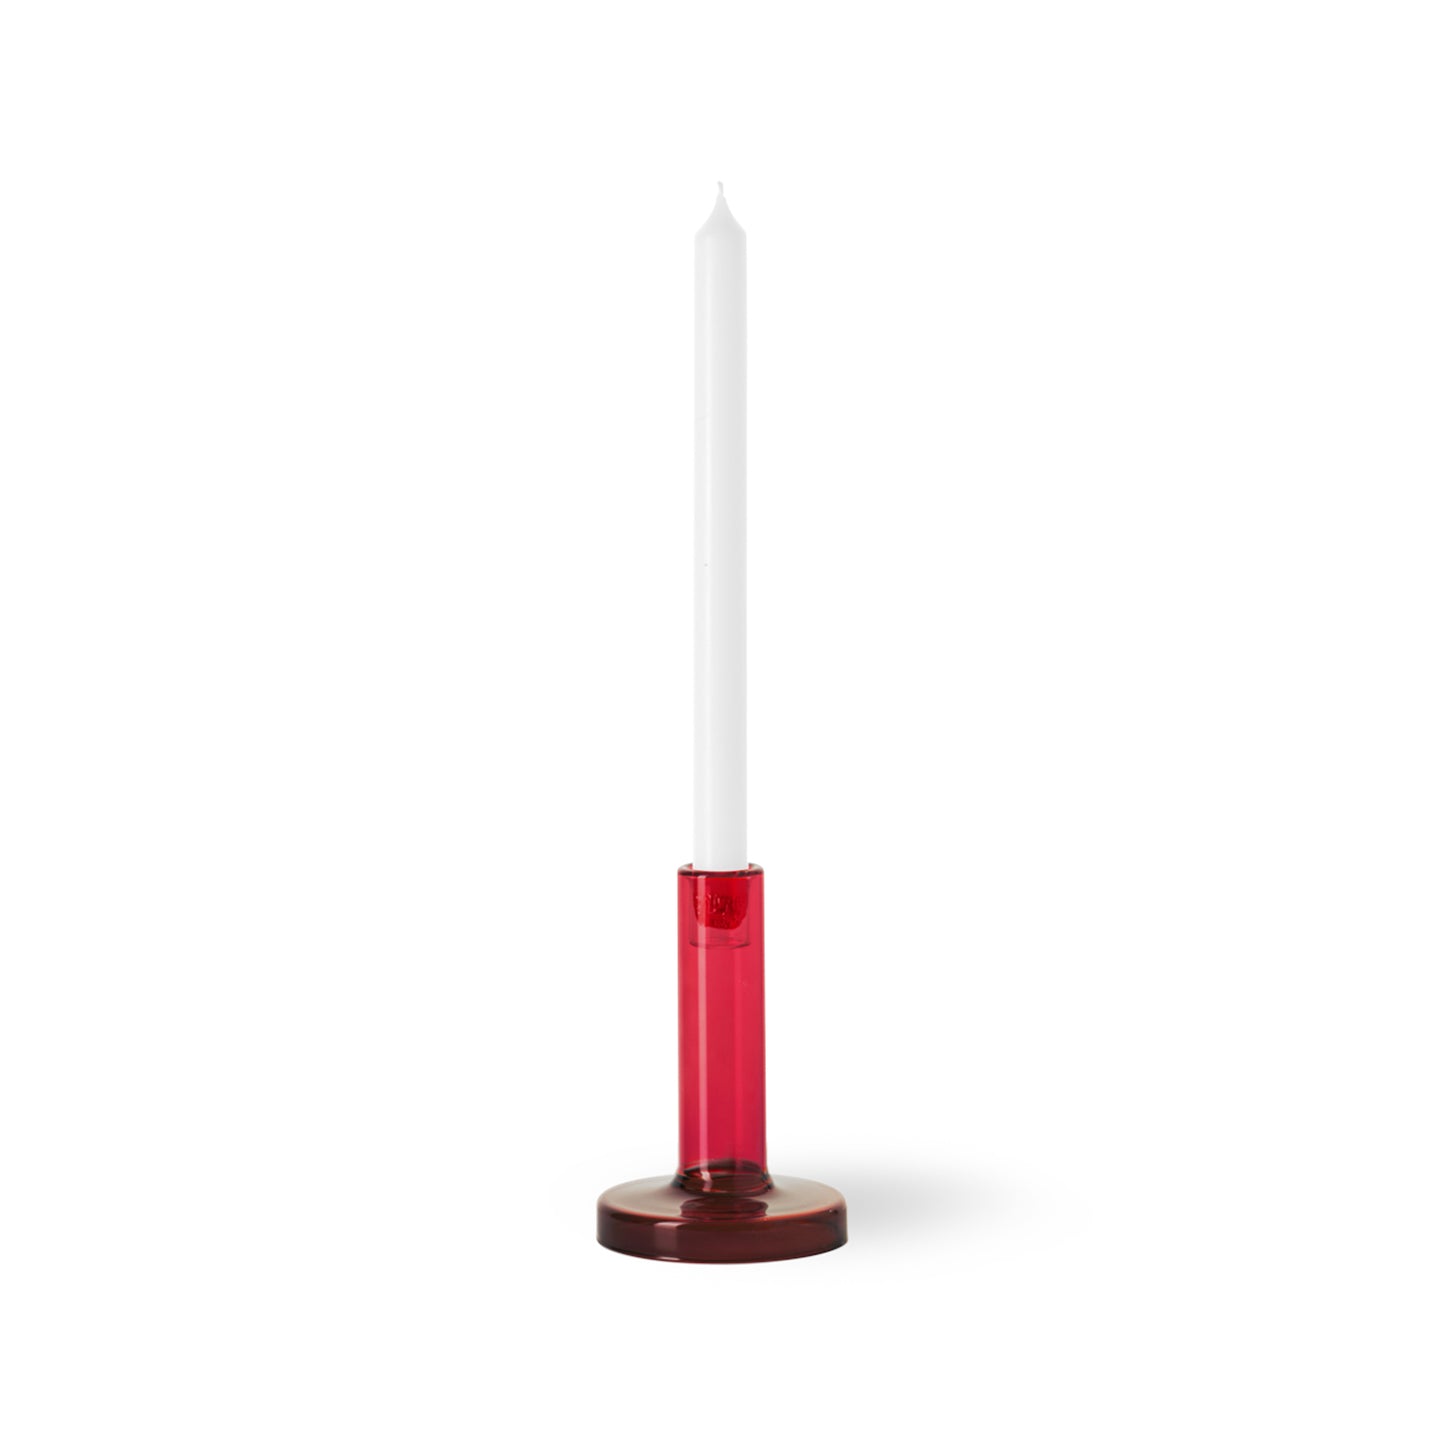 Bole Candleholder Small Red/Bordeaux  - SALE 30% OFF!